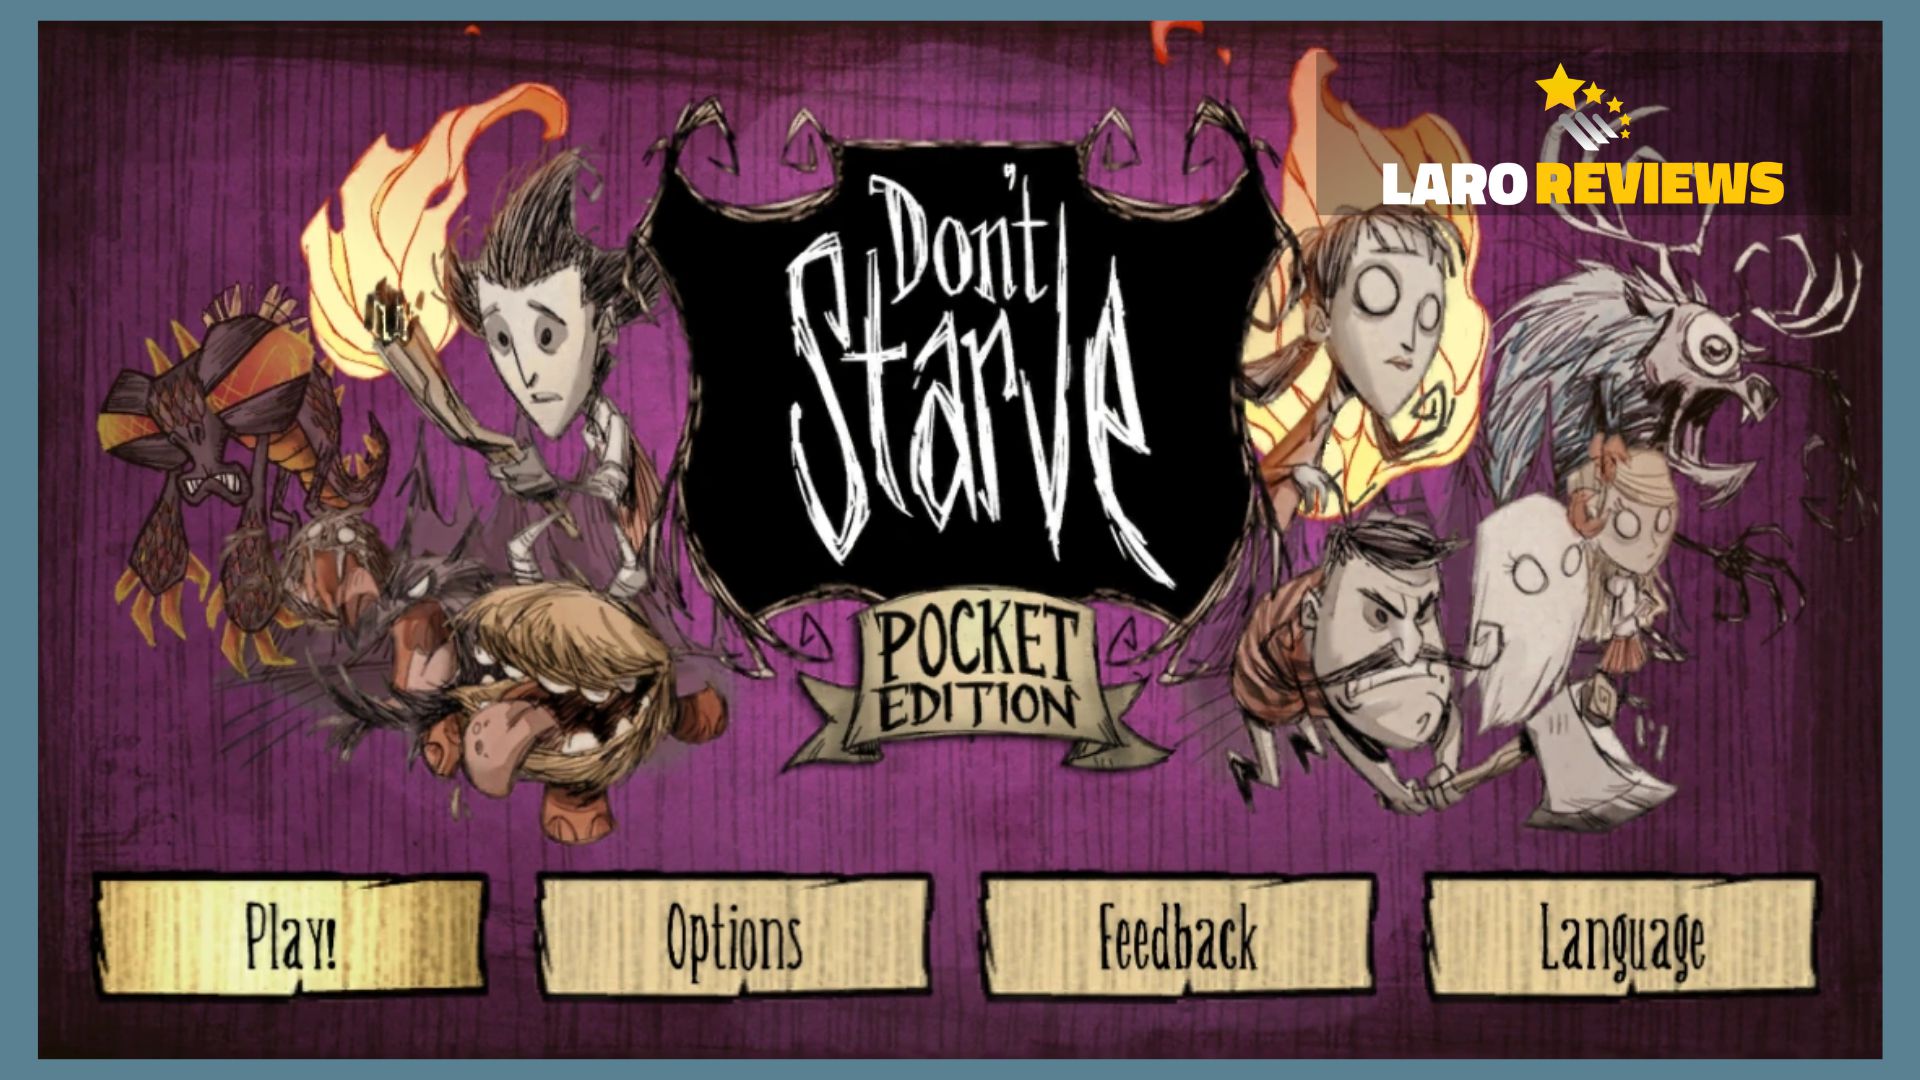 Starve: Pocket Edition Review